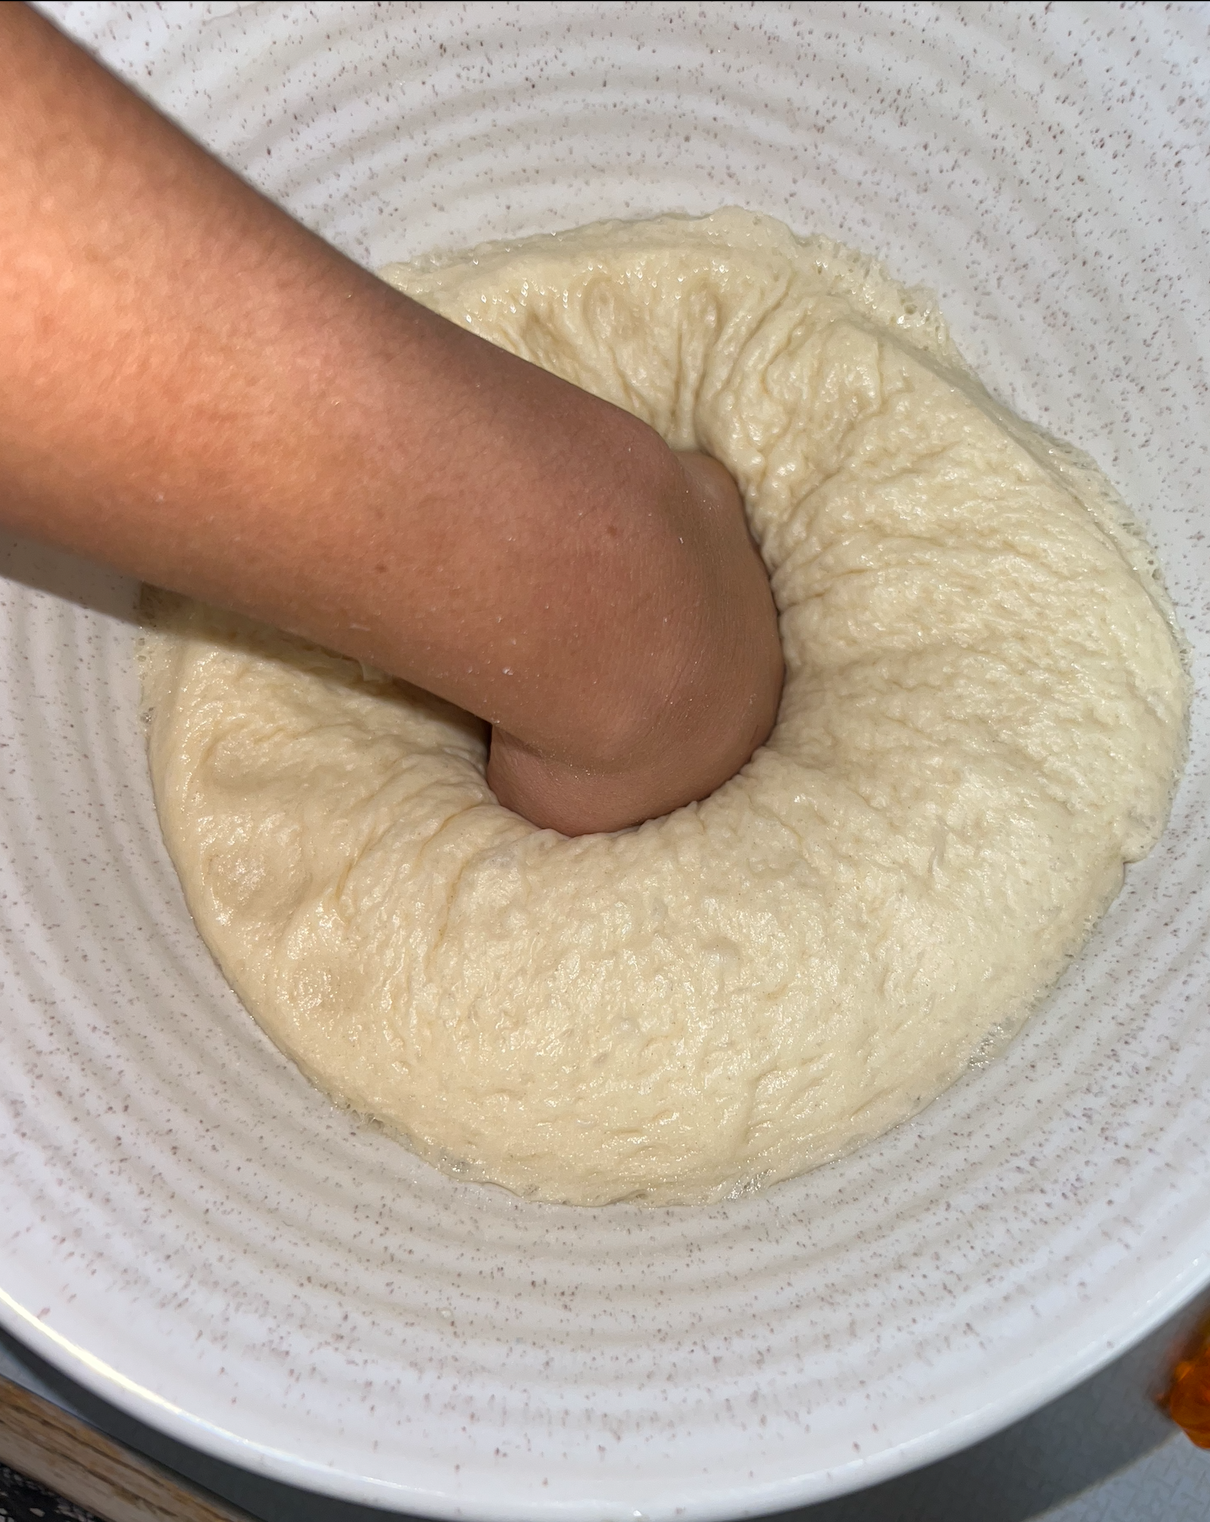 A fist punching the dough